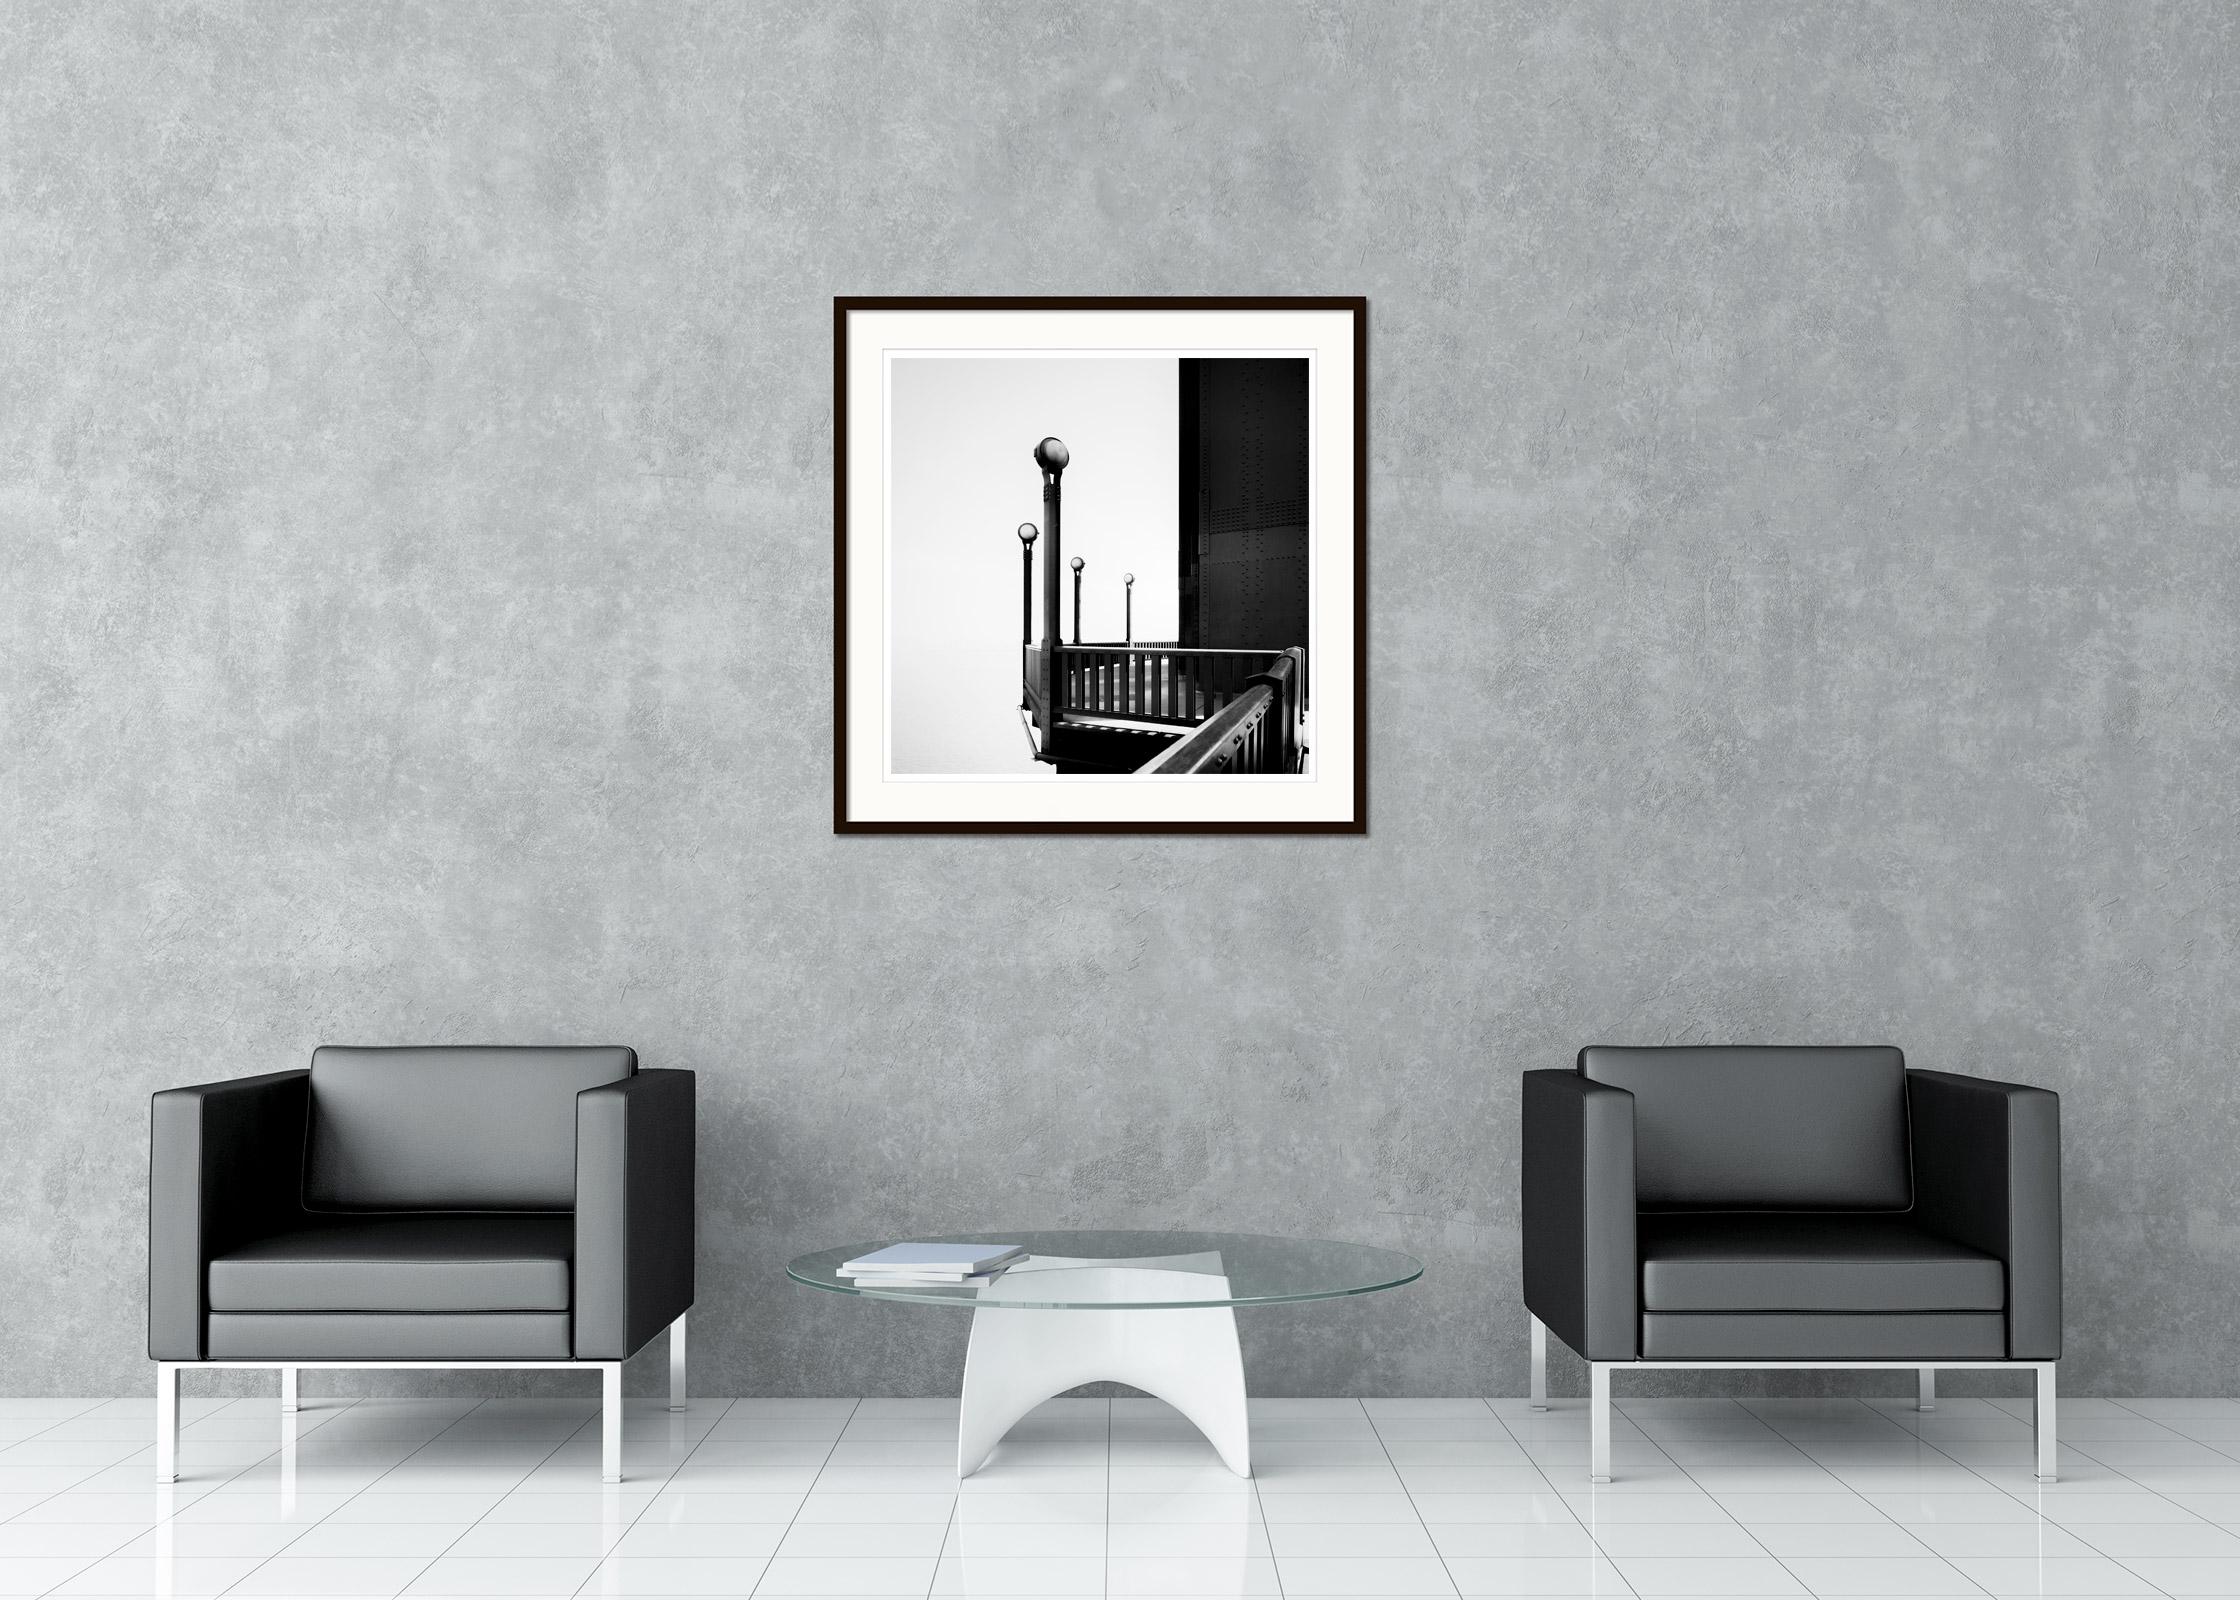 Black and white fine art cityscape - landscape photography. Golden gate bridge detail with the tower and beautiful lamps, San Francisco, California, USA. Archival pigment ink print as part of a limited edition of 9. All Gerald Berghammer prints are